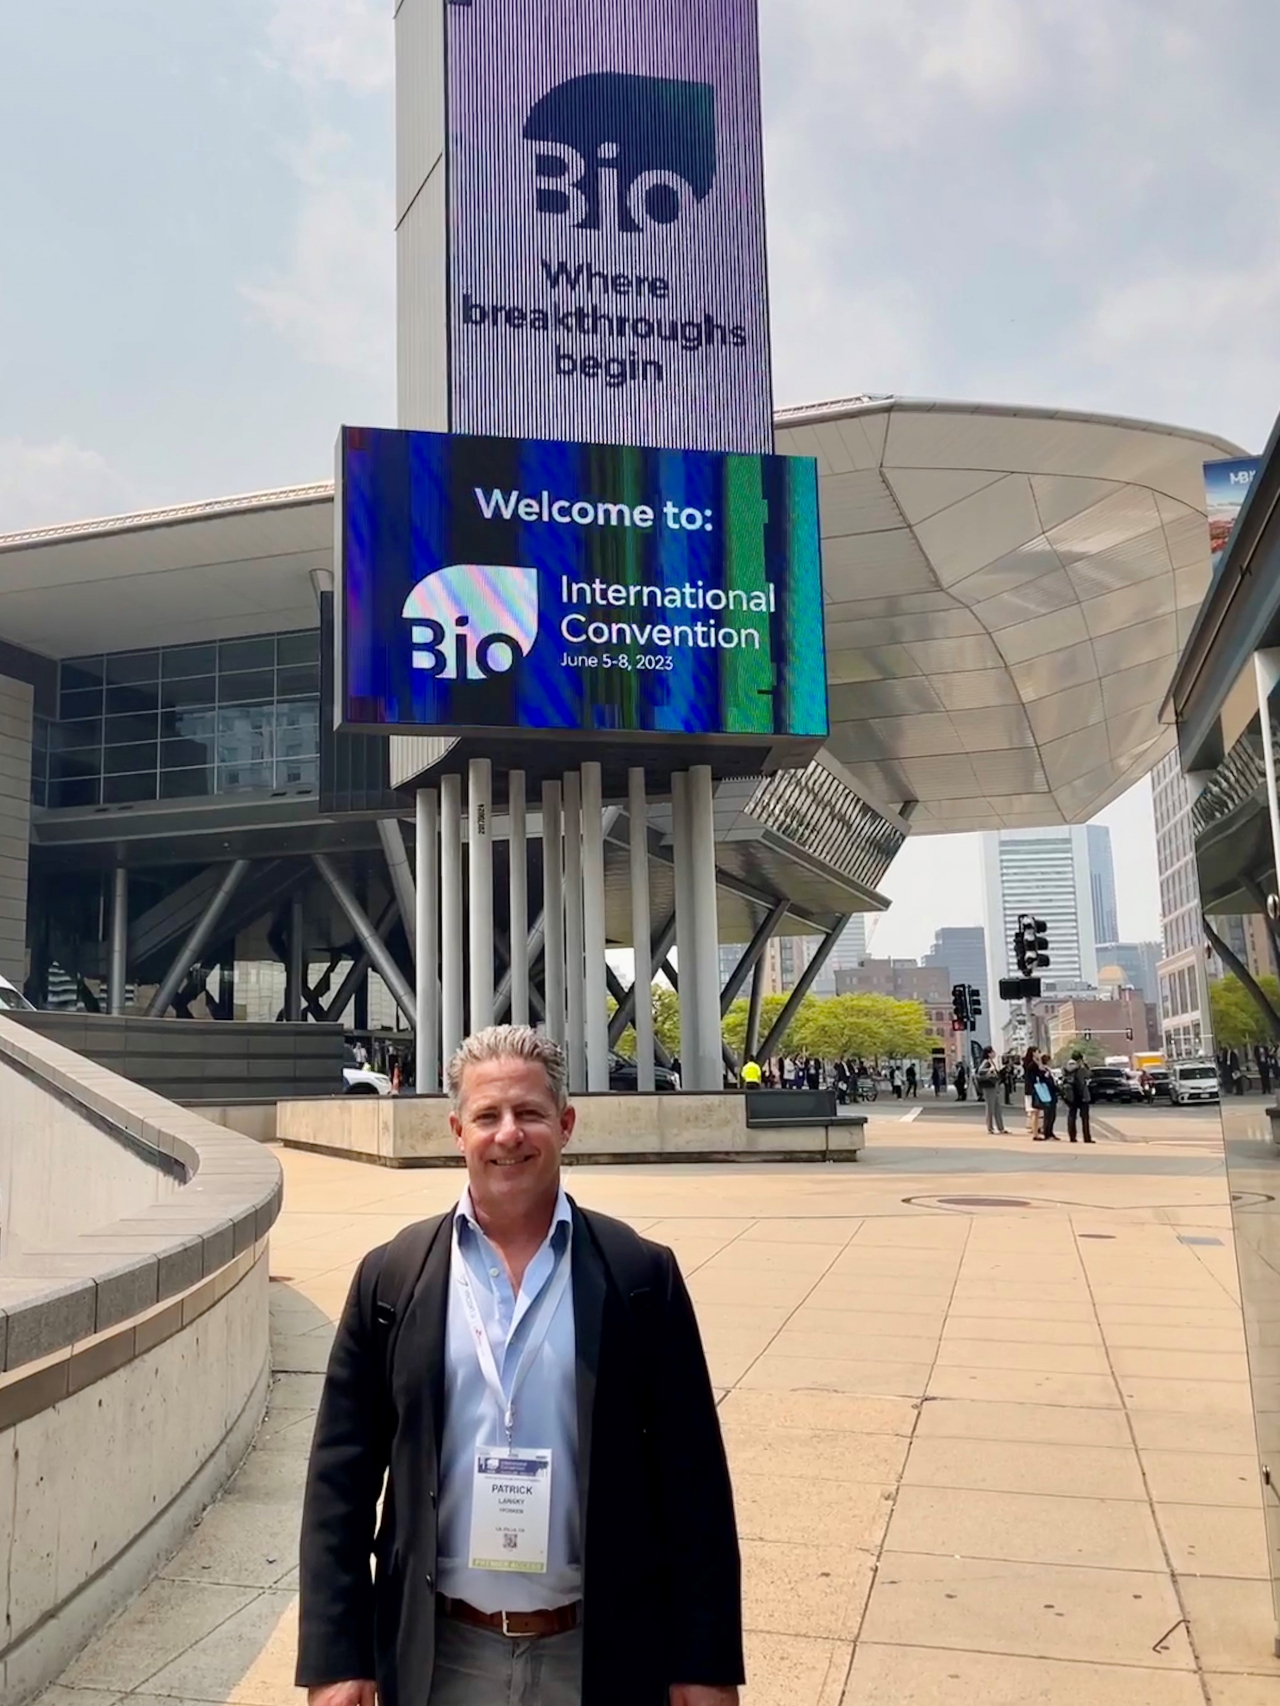 Patrick Lansky, vice president of US sales and marketing at Yposkesi poses at the Boston Convention and Exhibition Center in Boston, Massachusetts, where the 2023 BIO International Convention took place June 5-8.